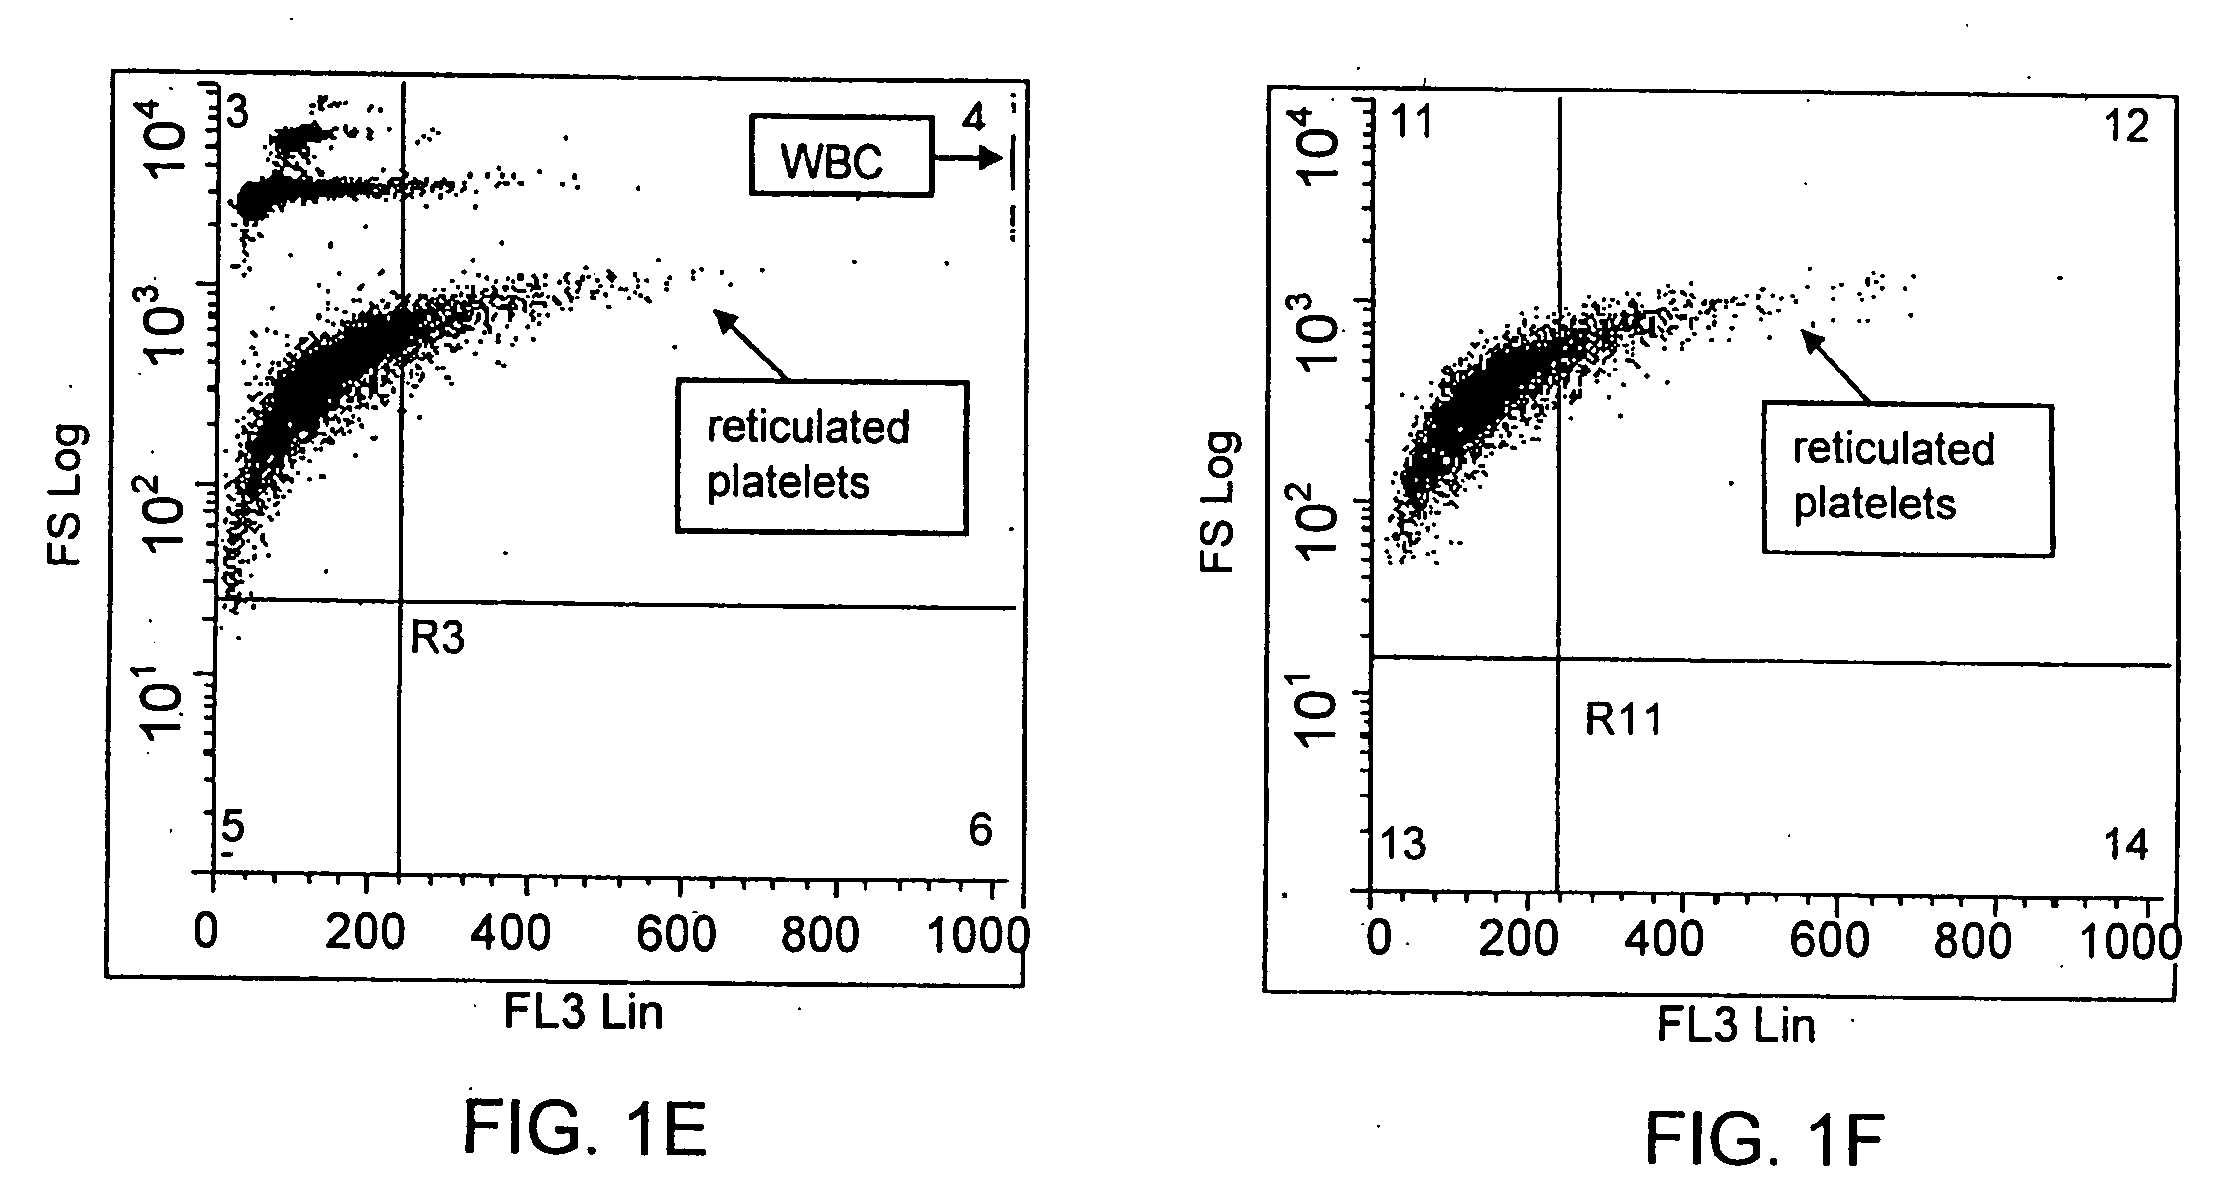 Method for a rapid antibody-based analysis of platelet populations